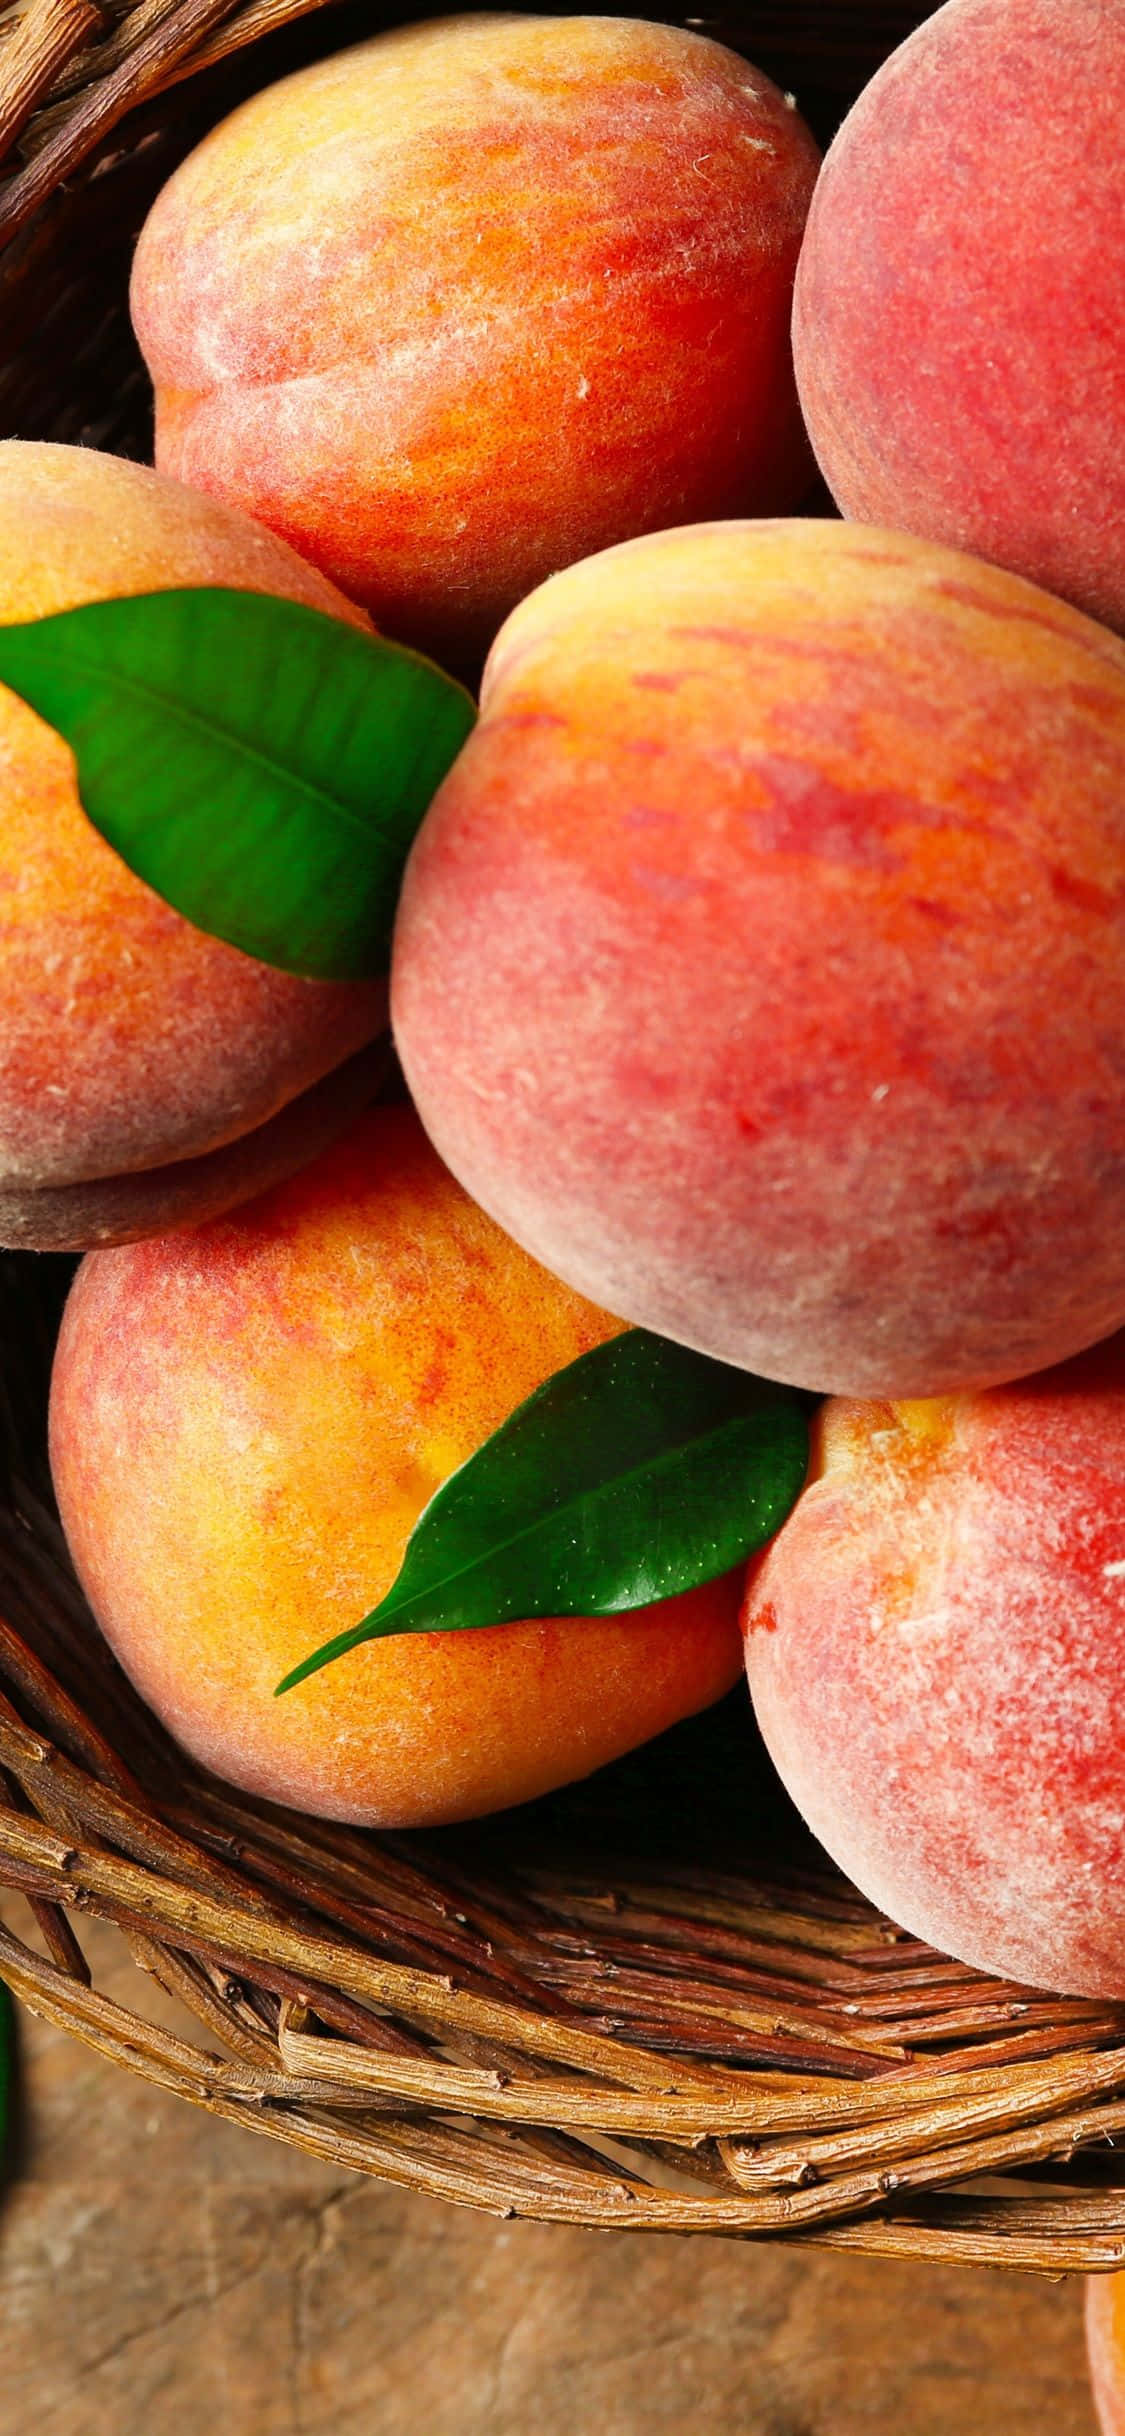 Unveil your bright and vibrant Peach Iphone Wallpaper